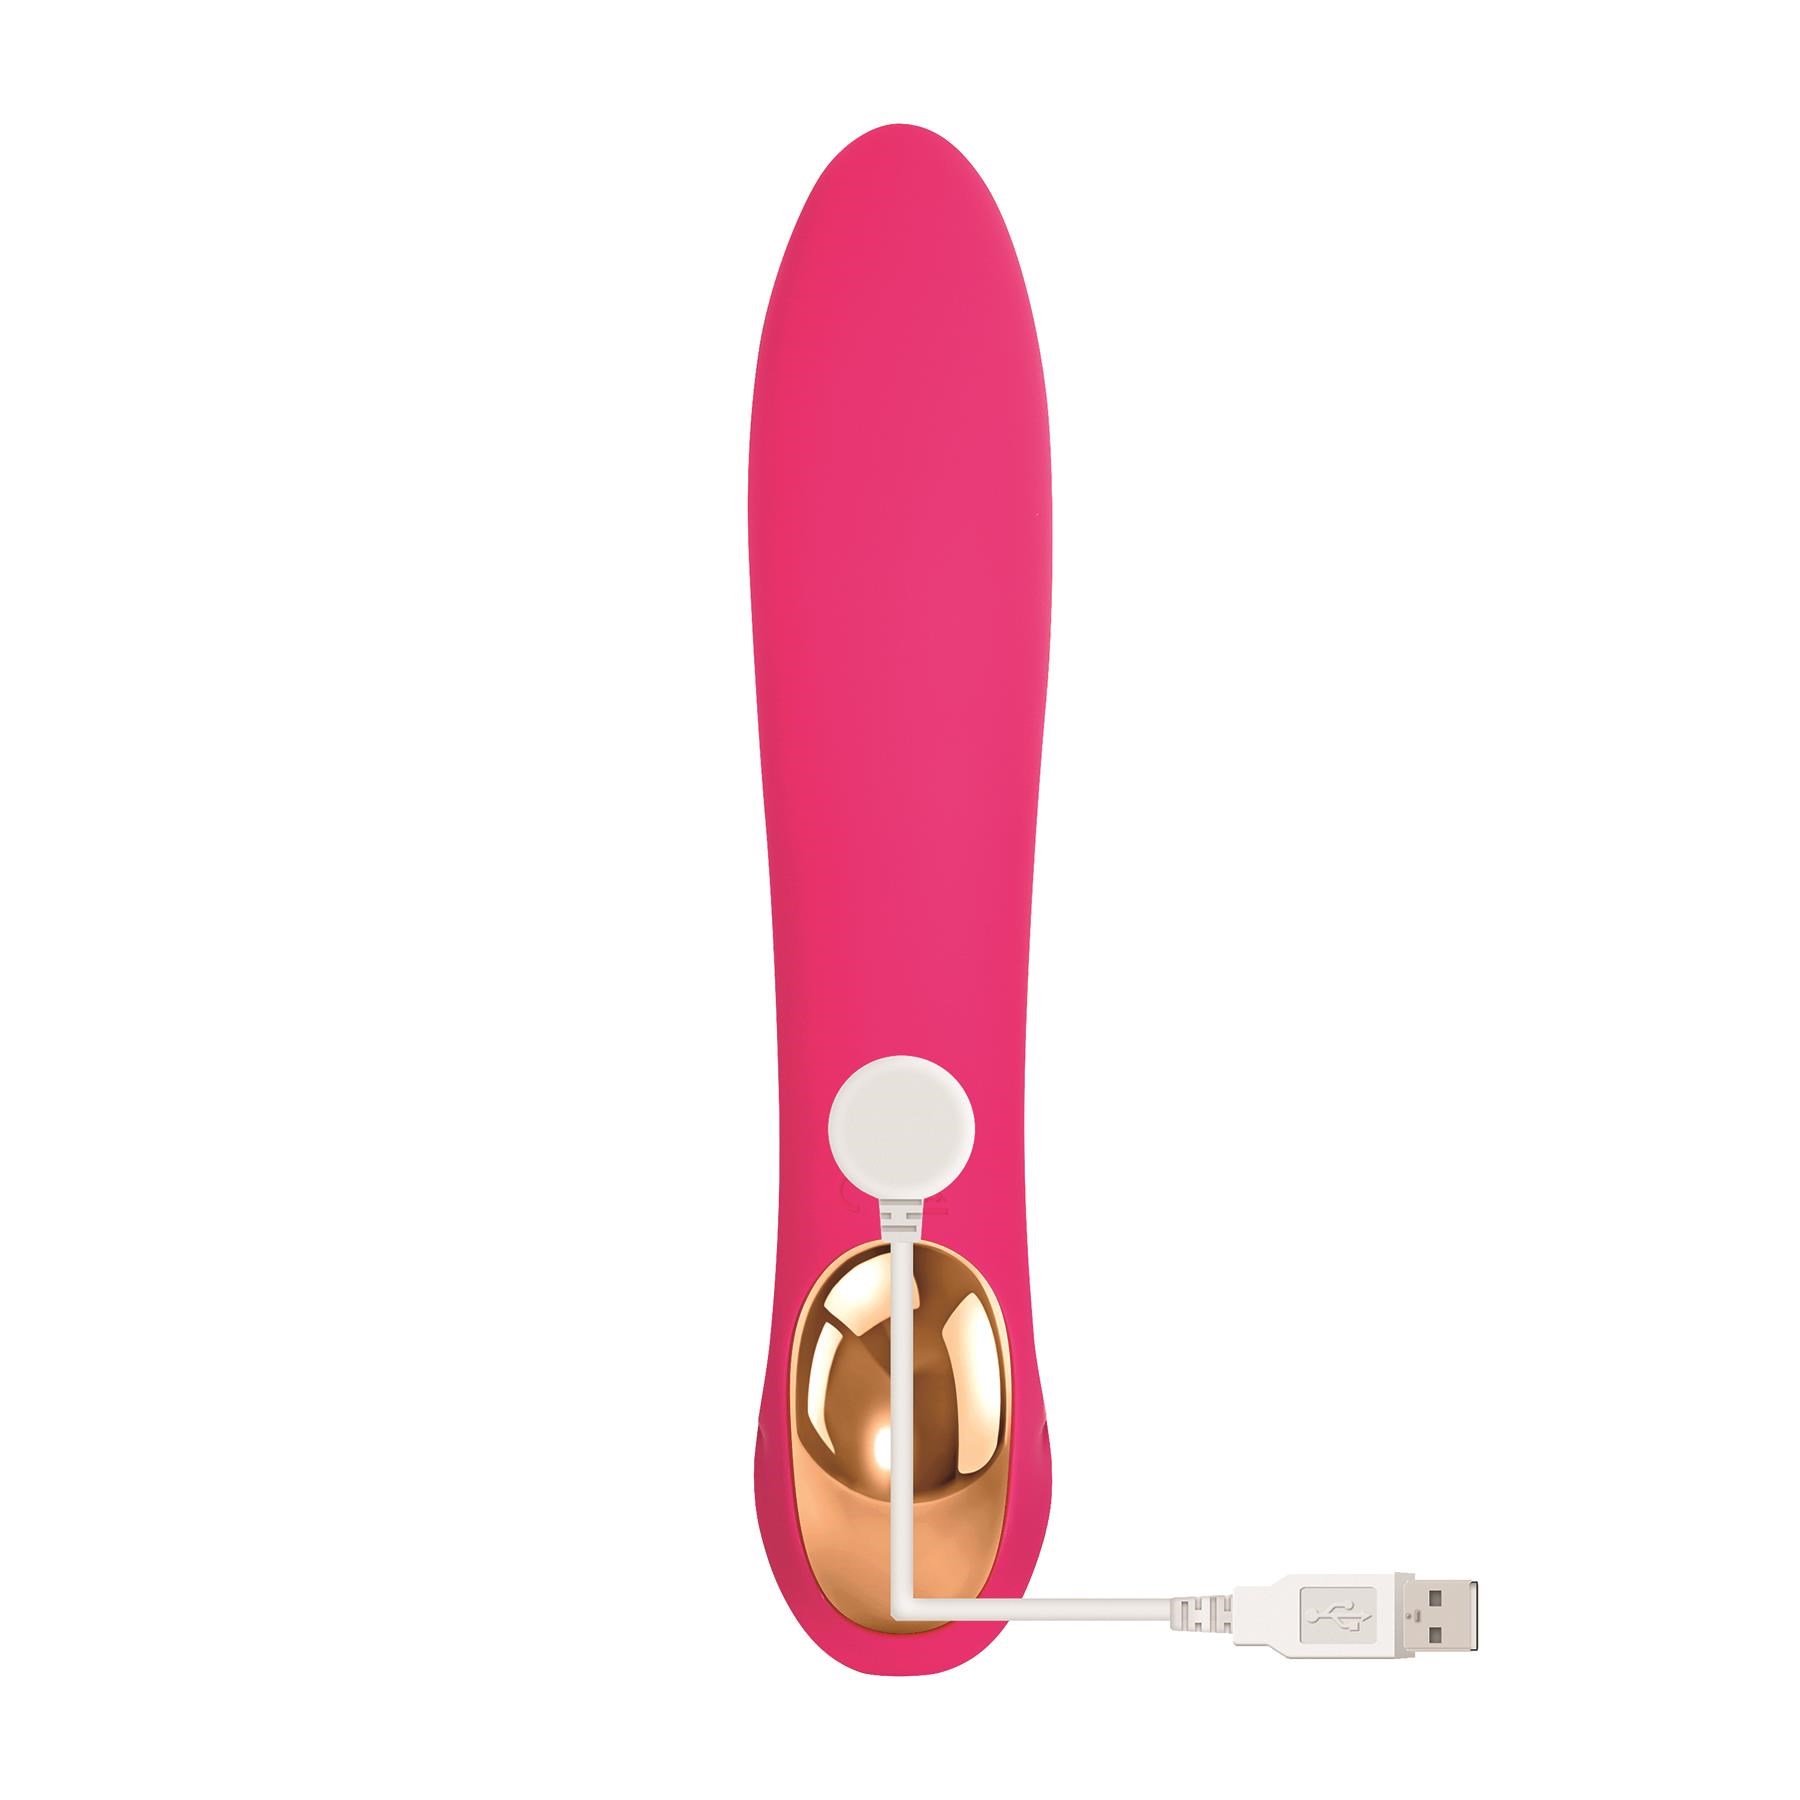 Eve's Bliss Vibrator Showing Where Charger is Placed